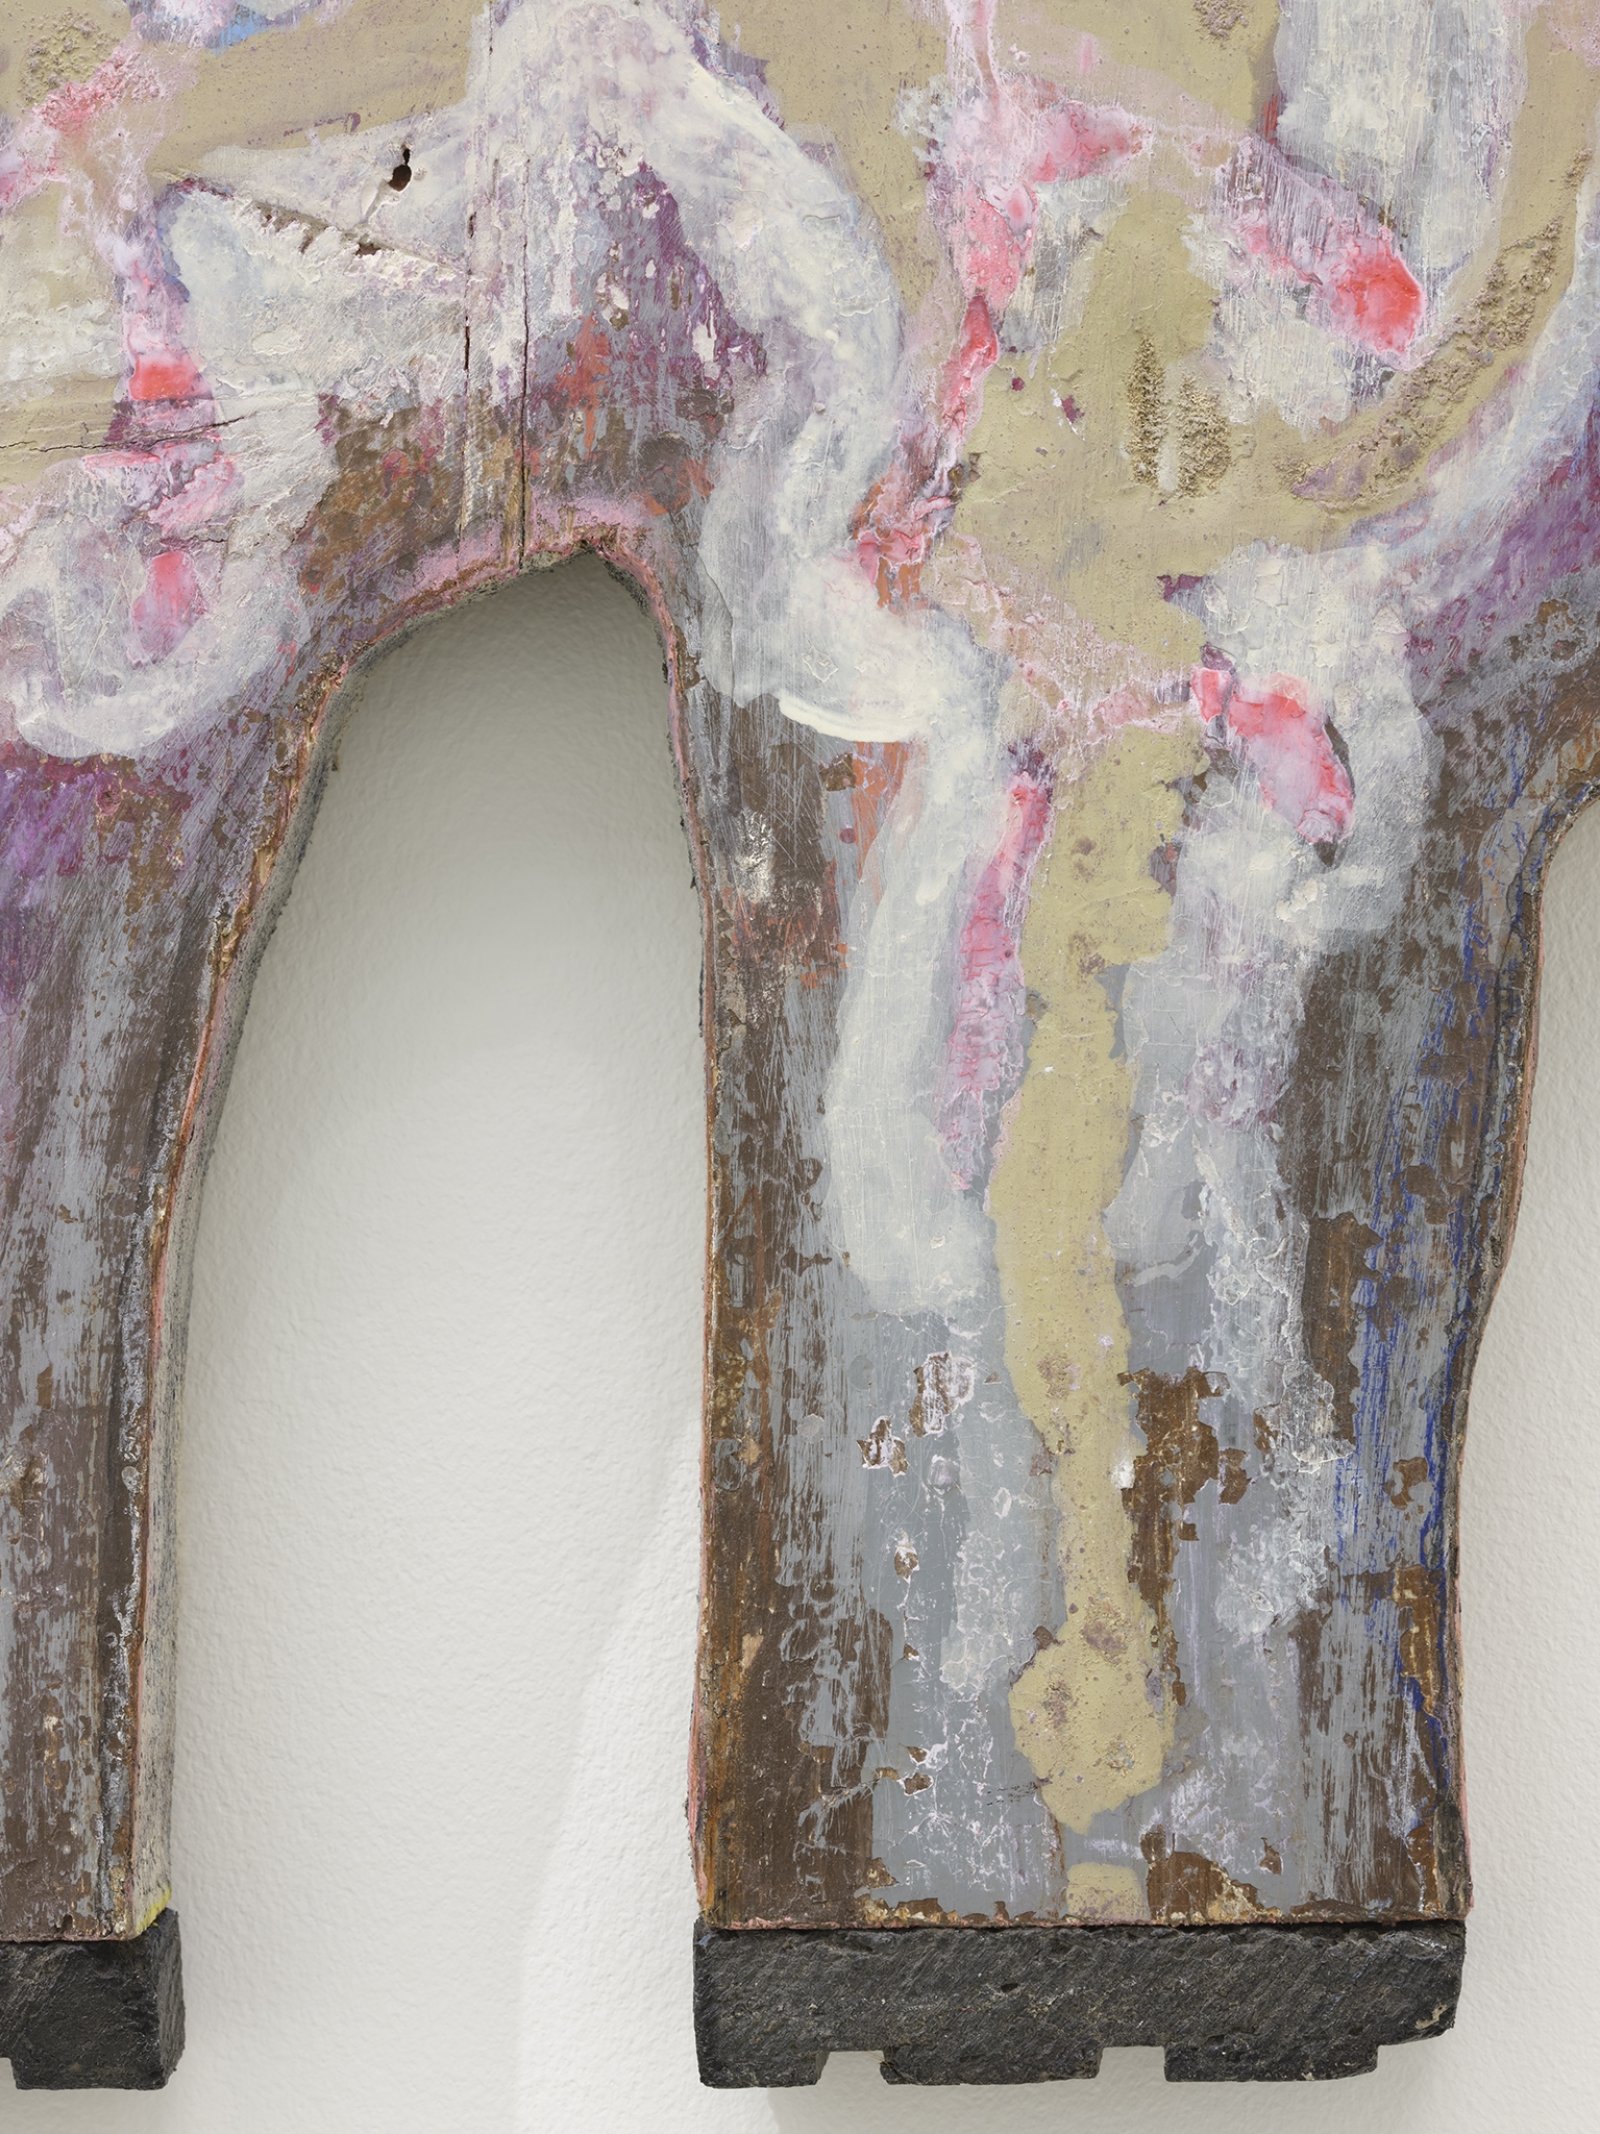 ​​Ashes Withyman, Mountain Toad sitting in the hollow of a rotting tree (detail), 2019, found wood, previously frozen paint, coloured pencil, rubber, 18 x 11 in. (46 x 28 cm)​ by Ashes Withyman